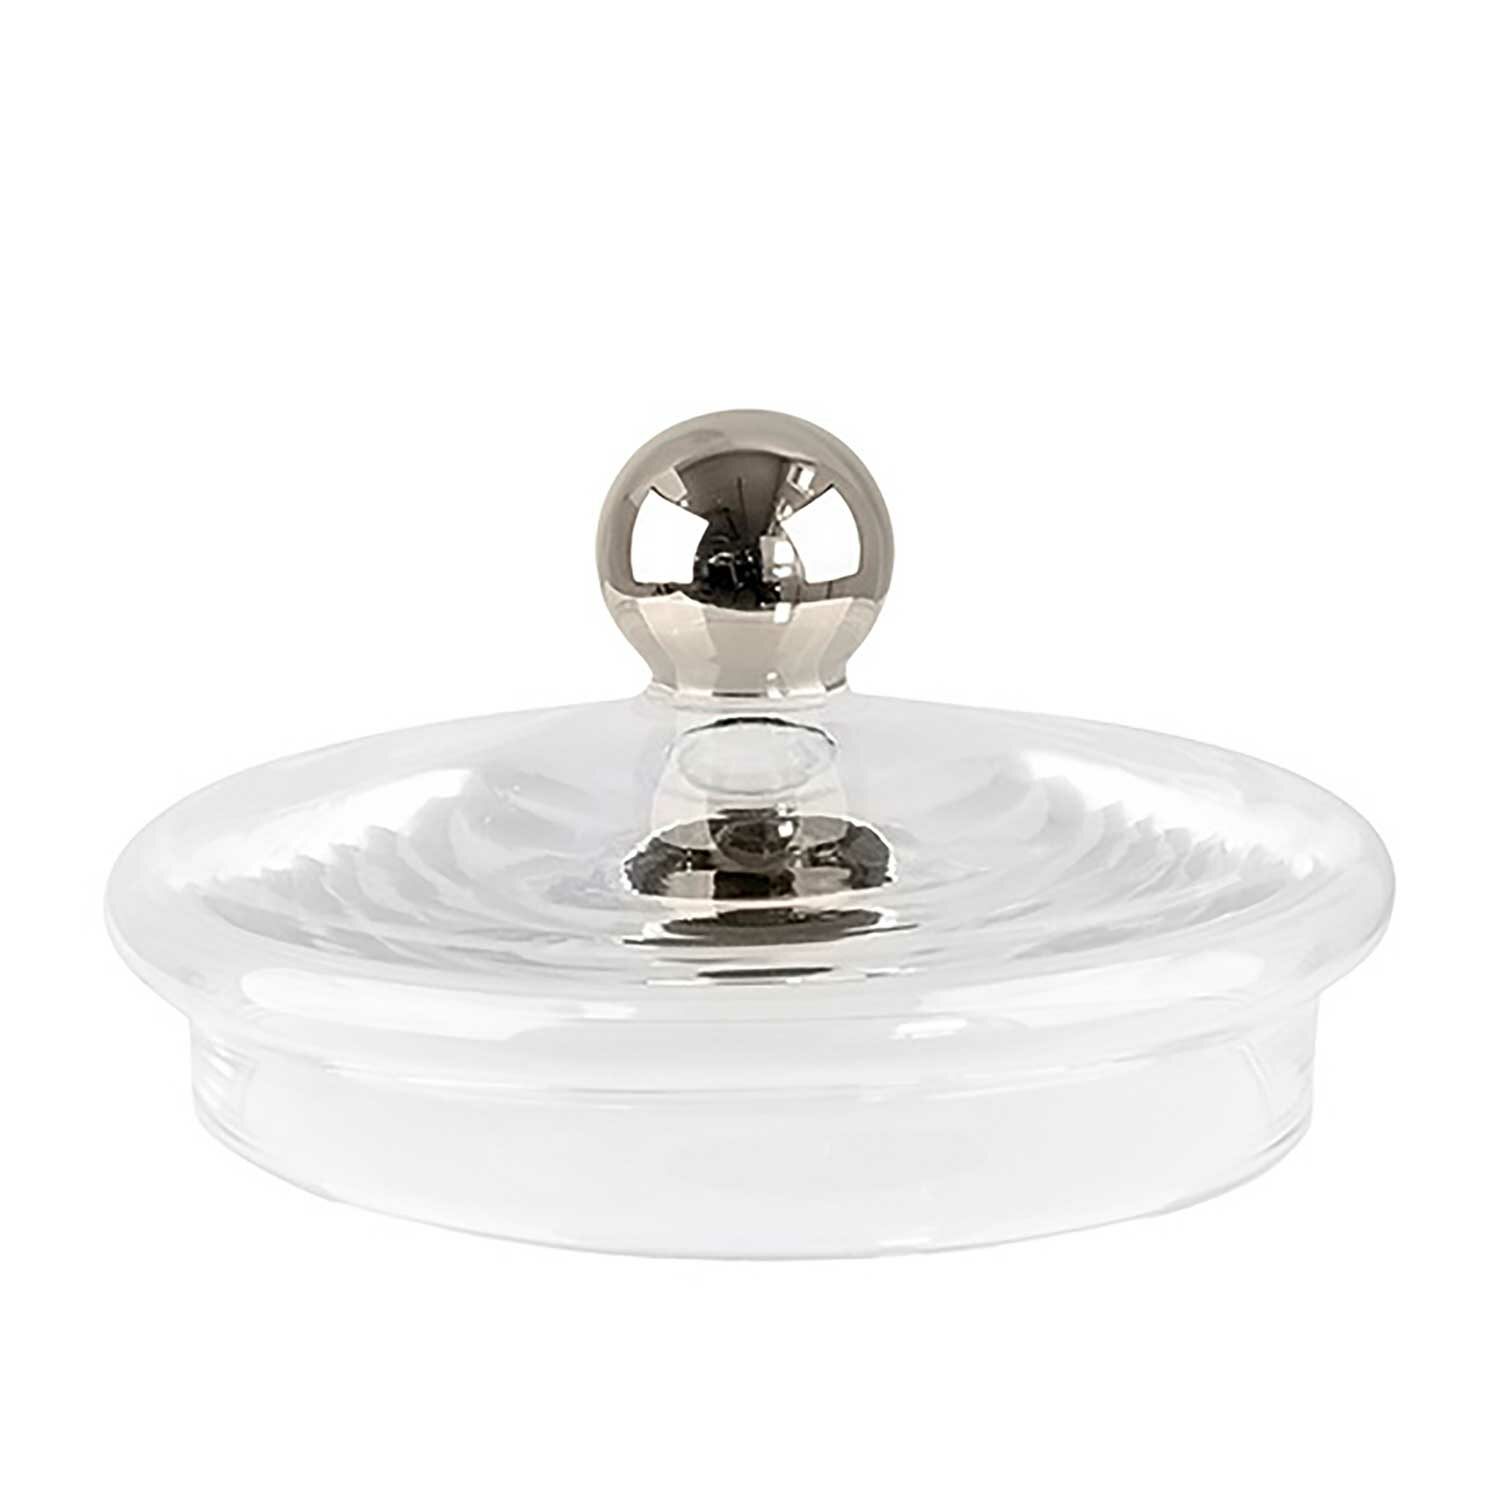 PLATINUM glass candy dish on a stand